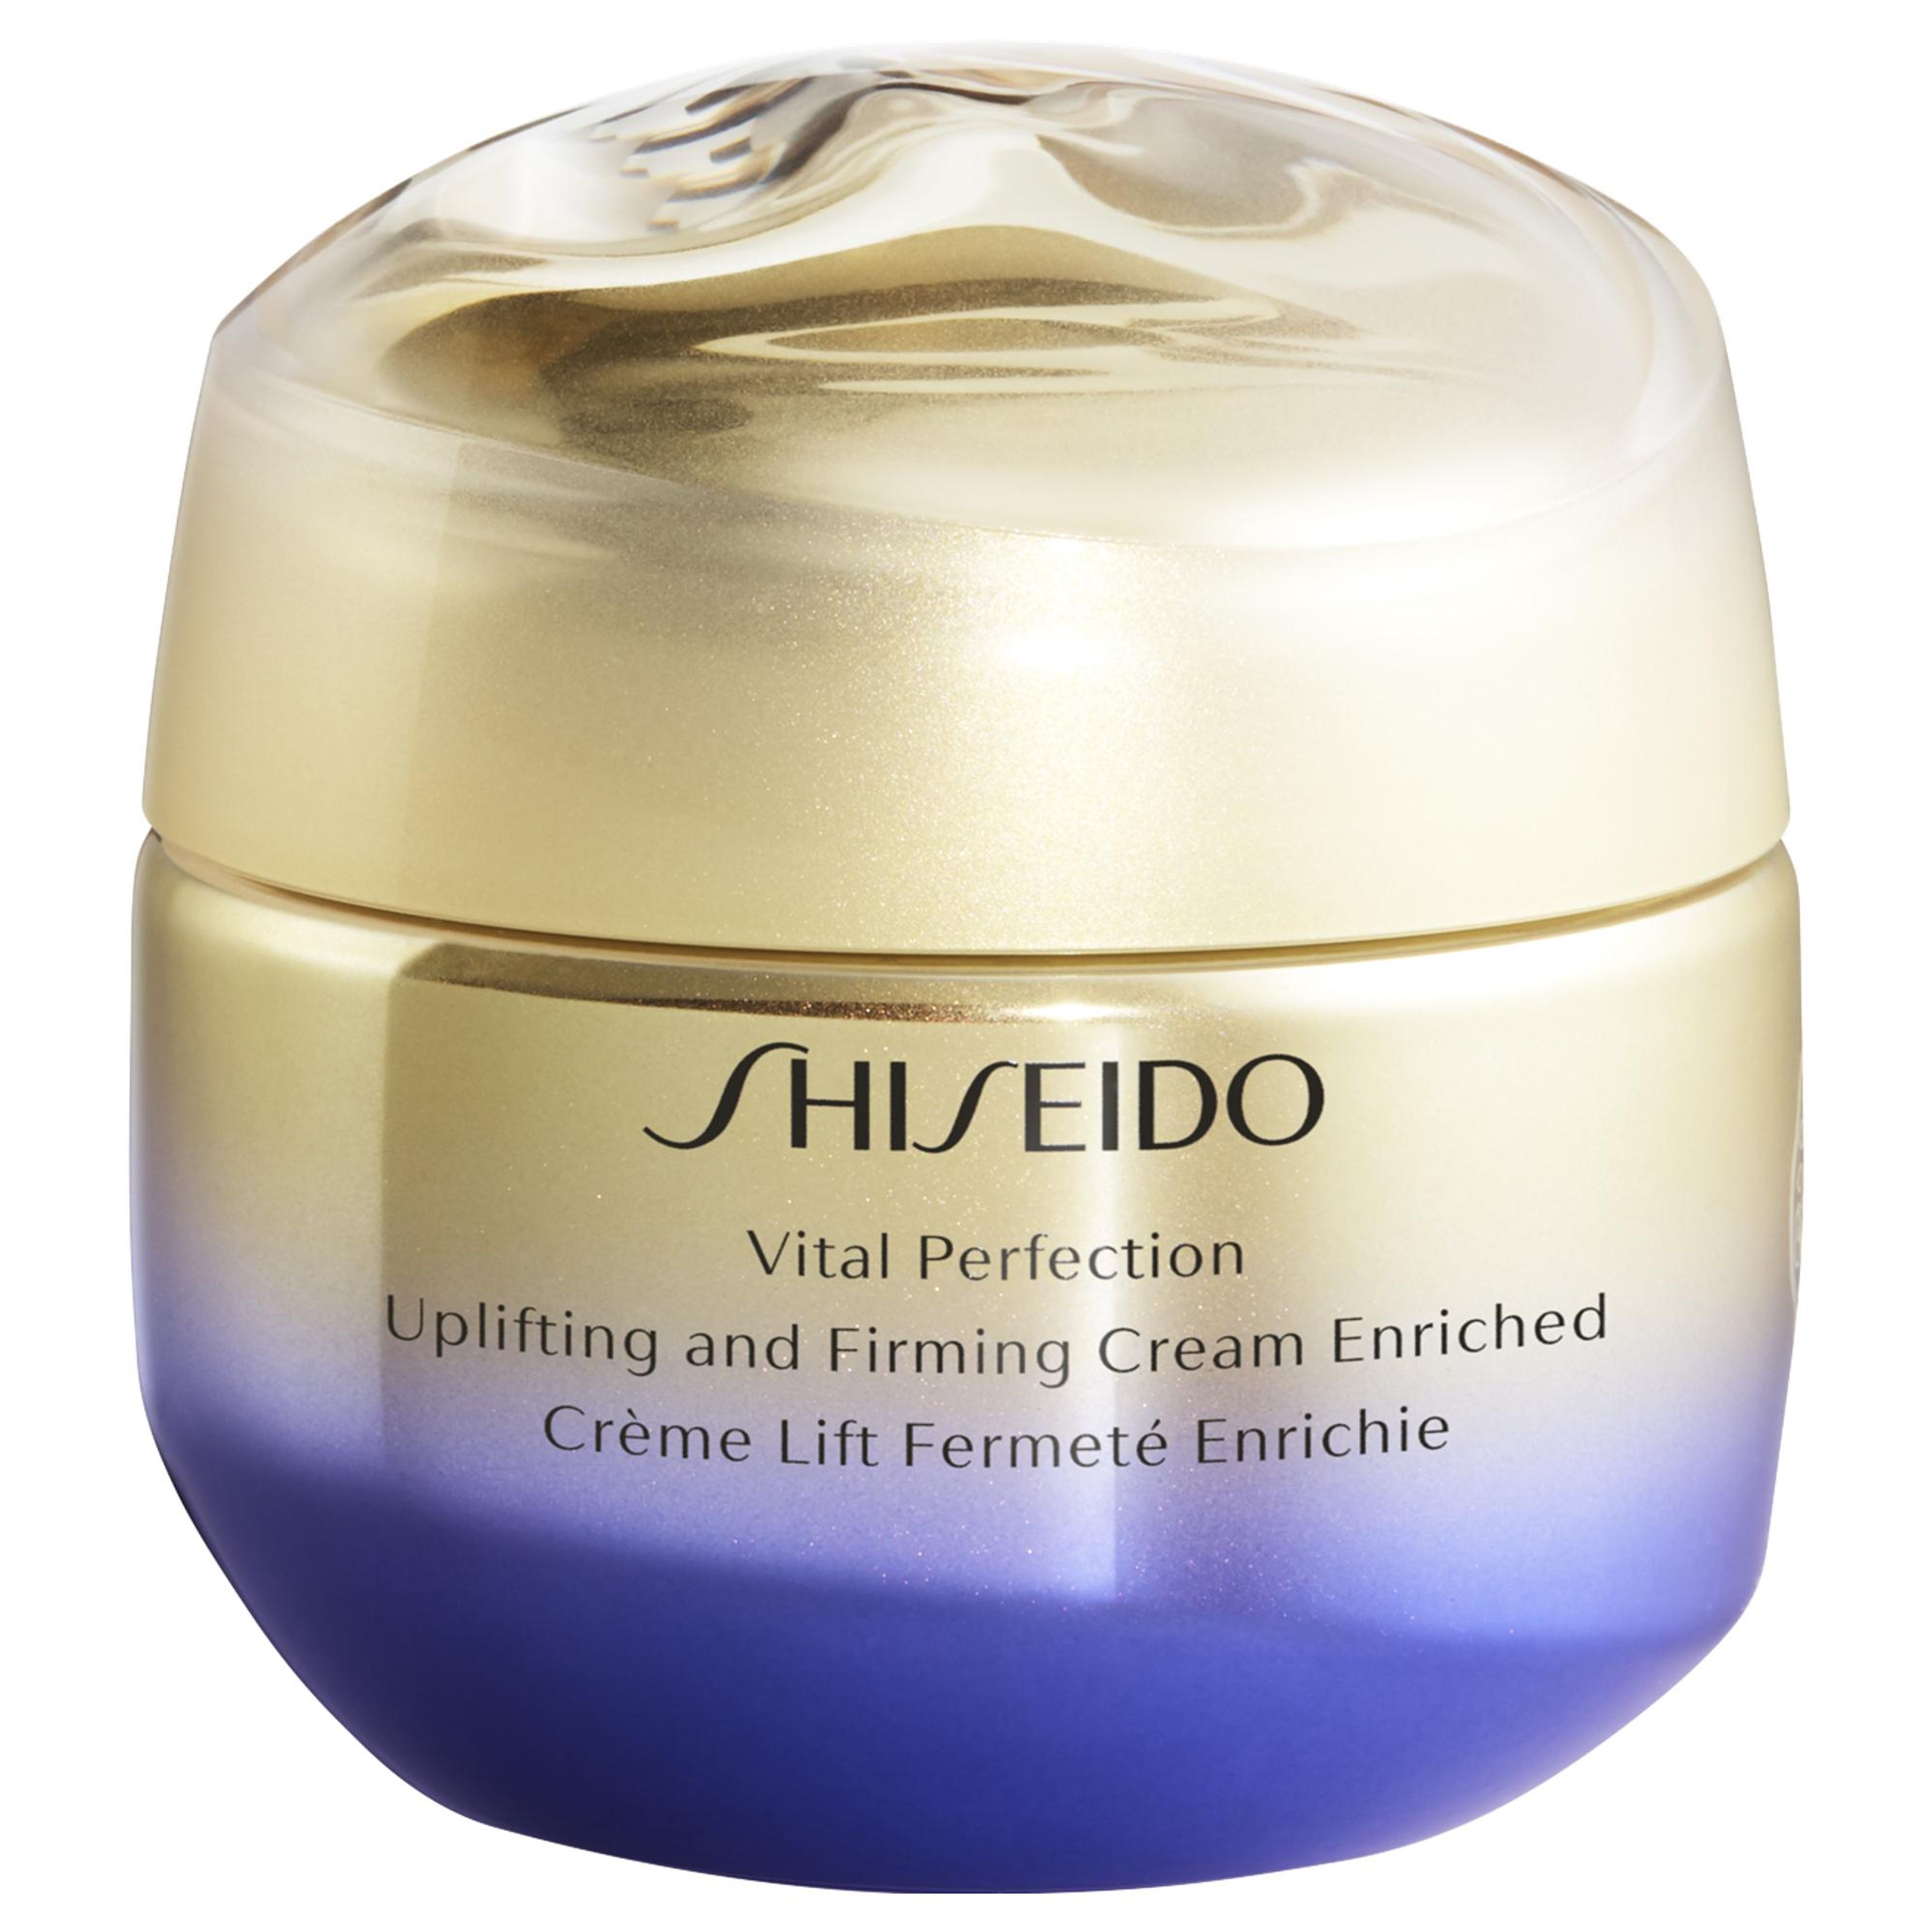 Shiseido Uplifting And Firming Cream Enriched 1